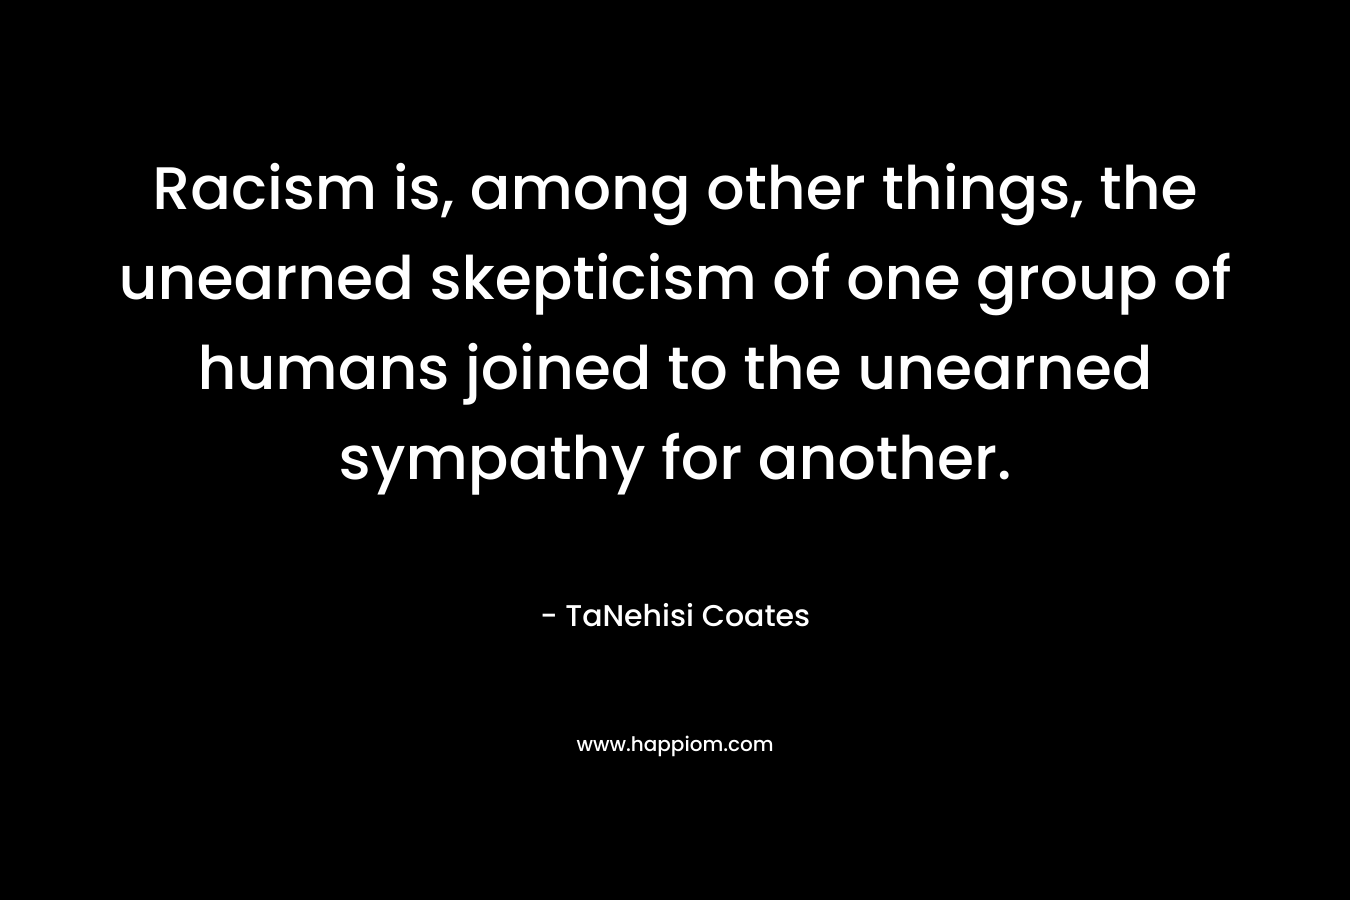 Racism is, among other things, the unearned skepticism of one group of humans joined to the unearned sympathy for another. – TaNehisi Coates